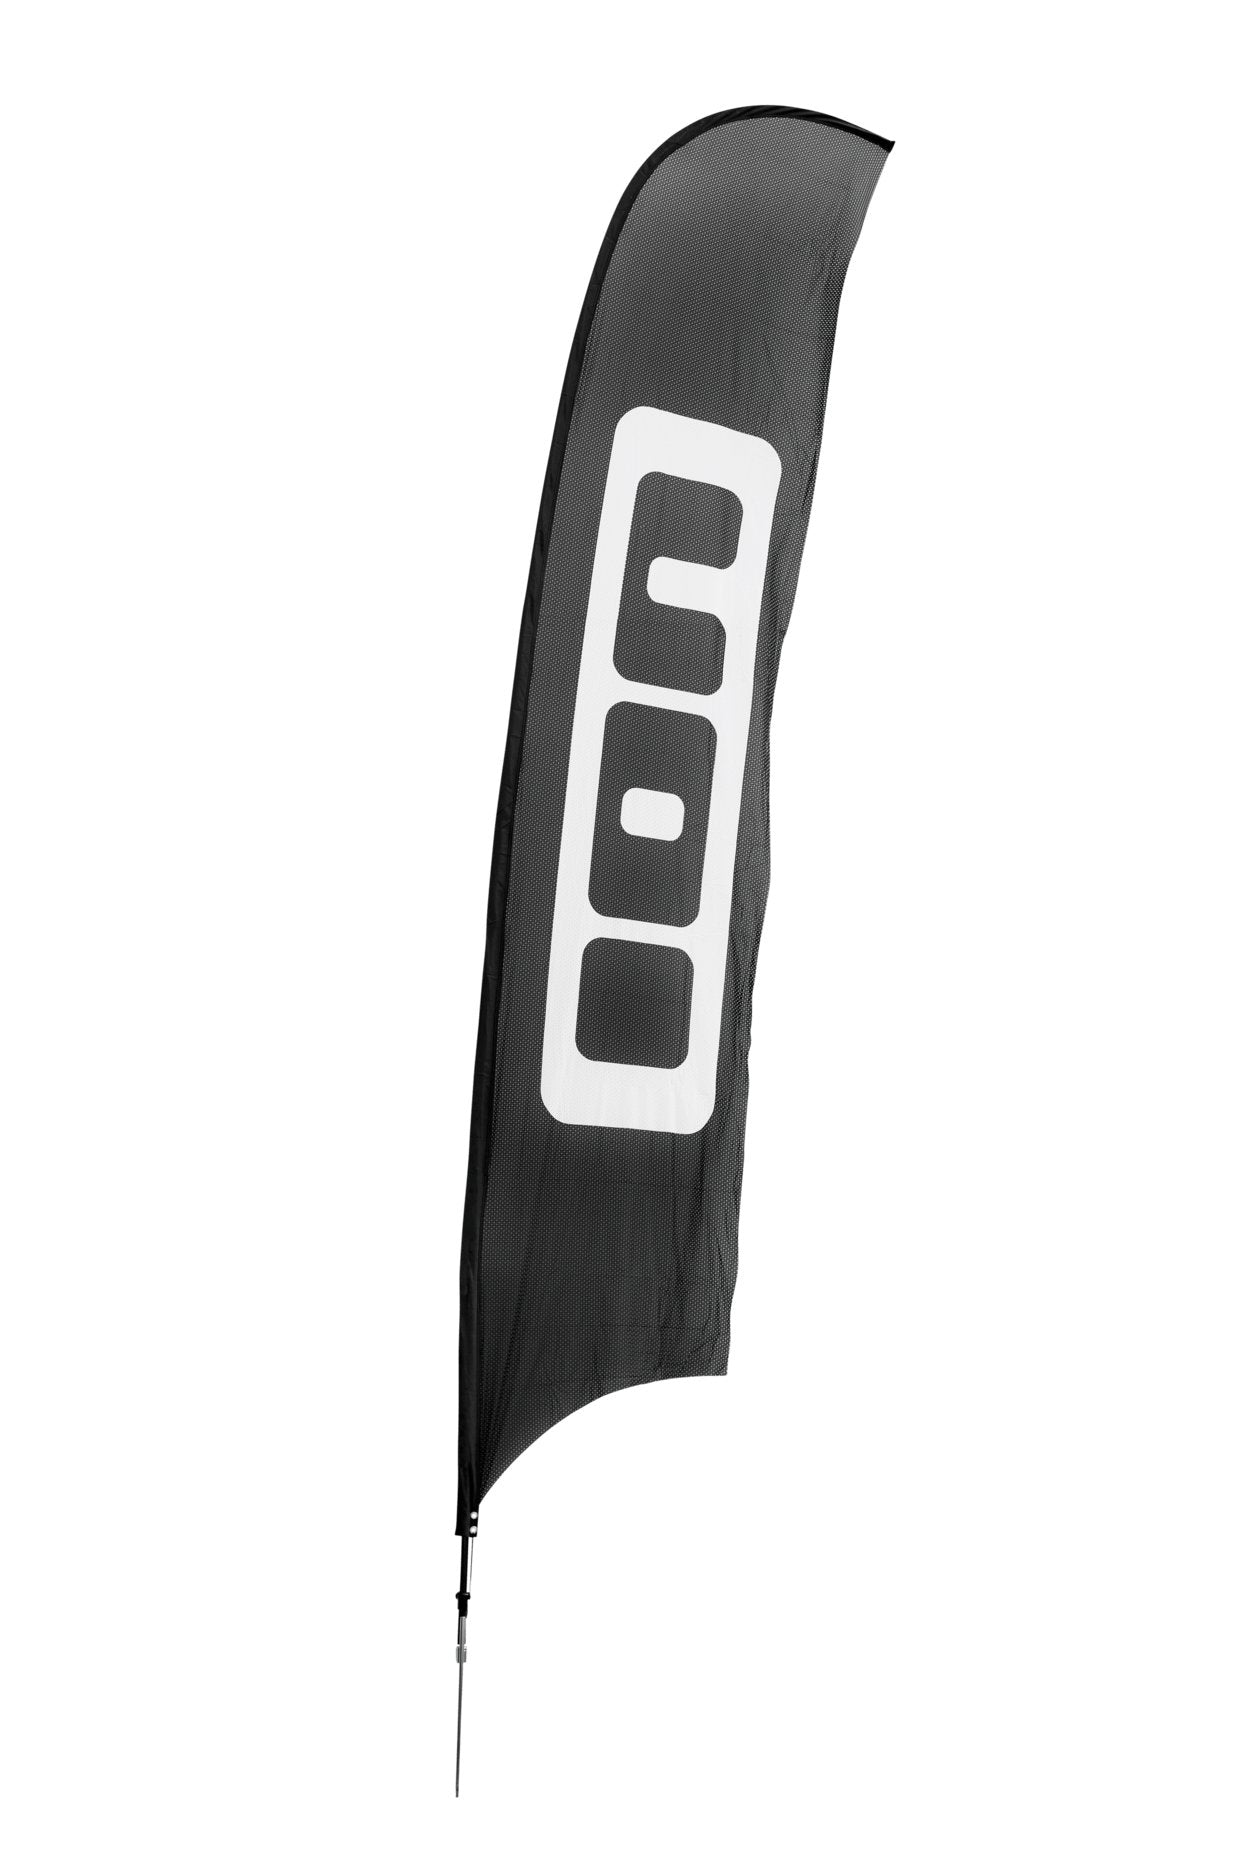 ION Beachflag incl. Pole&Foot 2022 - Worthing Watersports - 9008415488292 - Promo - ION Water